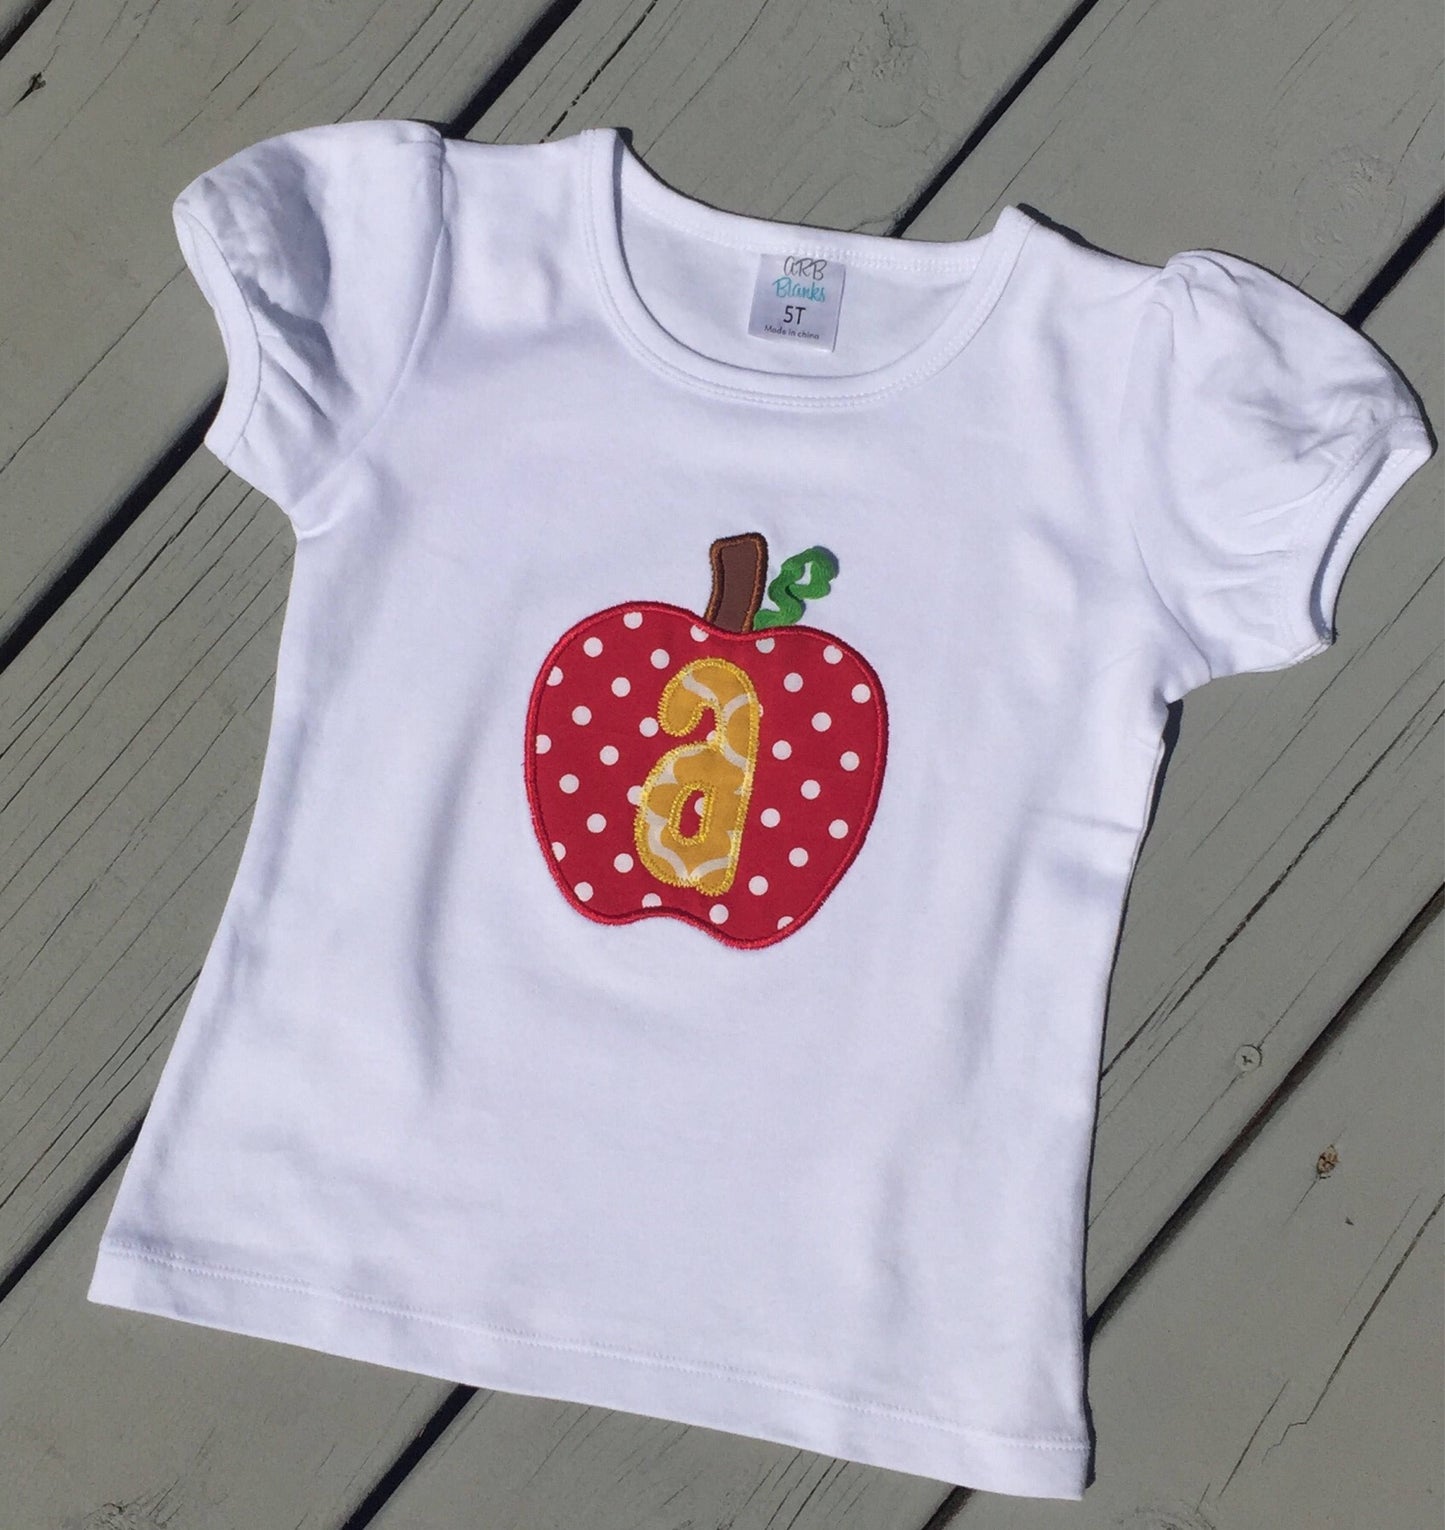 Back to school shirt, Fast Shipping - 1-3 days, apple shirt, back to School outfit, apple initial shirt, back to school